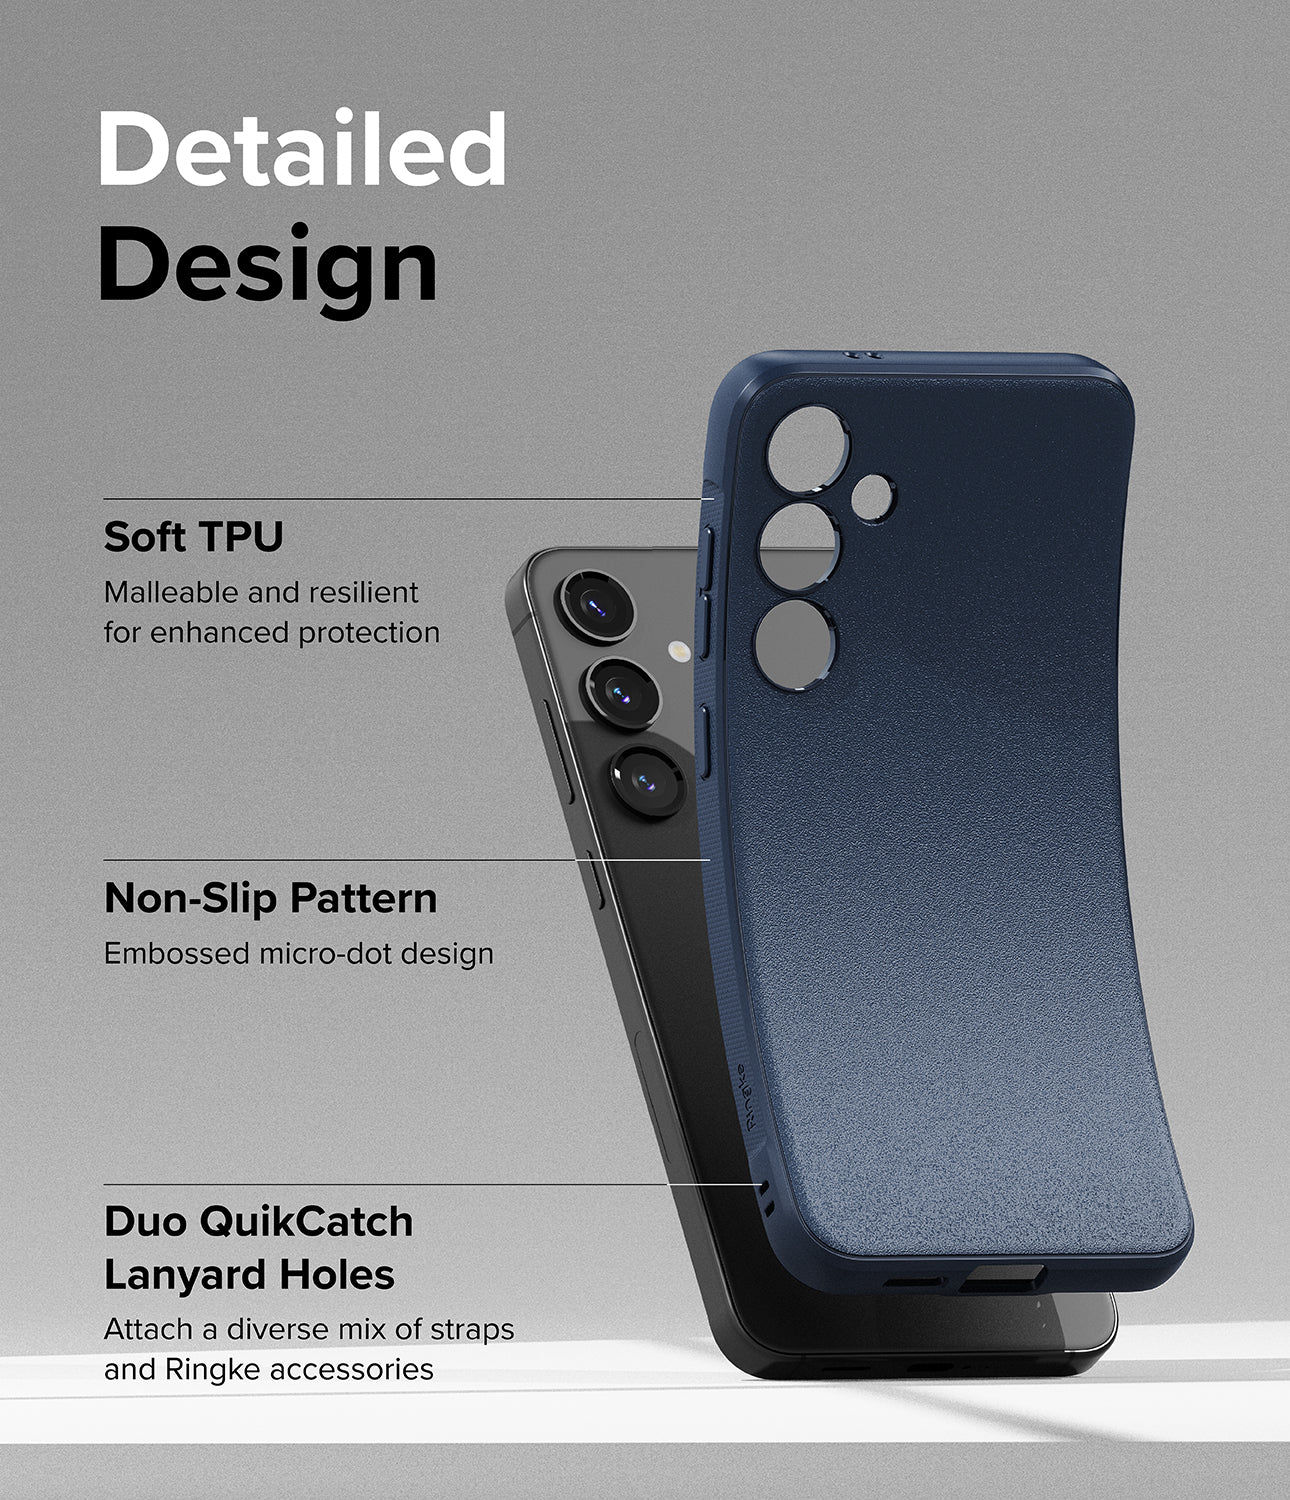 Galaxy S24 Plus Case | Onyx - Navy - Detailed Design. Malleable and resilient for enhanced protection with Soft TPU. Embossed micro-dot design with Non-Slip Pattern. Attach a diverse mix of straps and Ringke accessories.